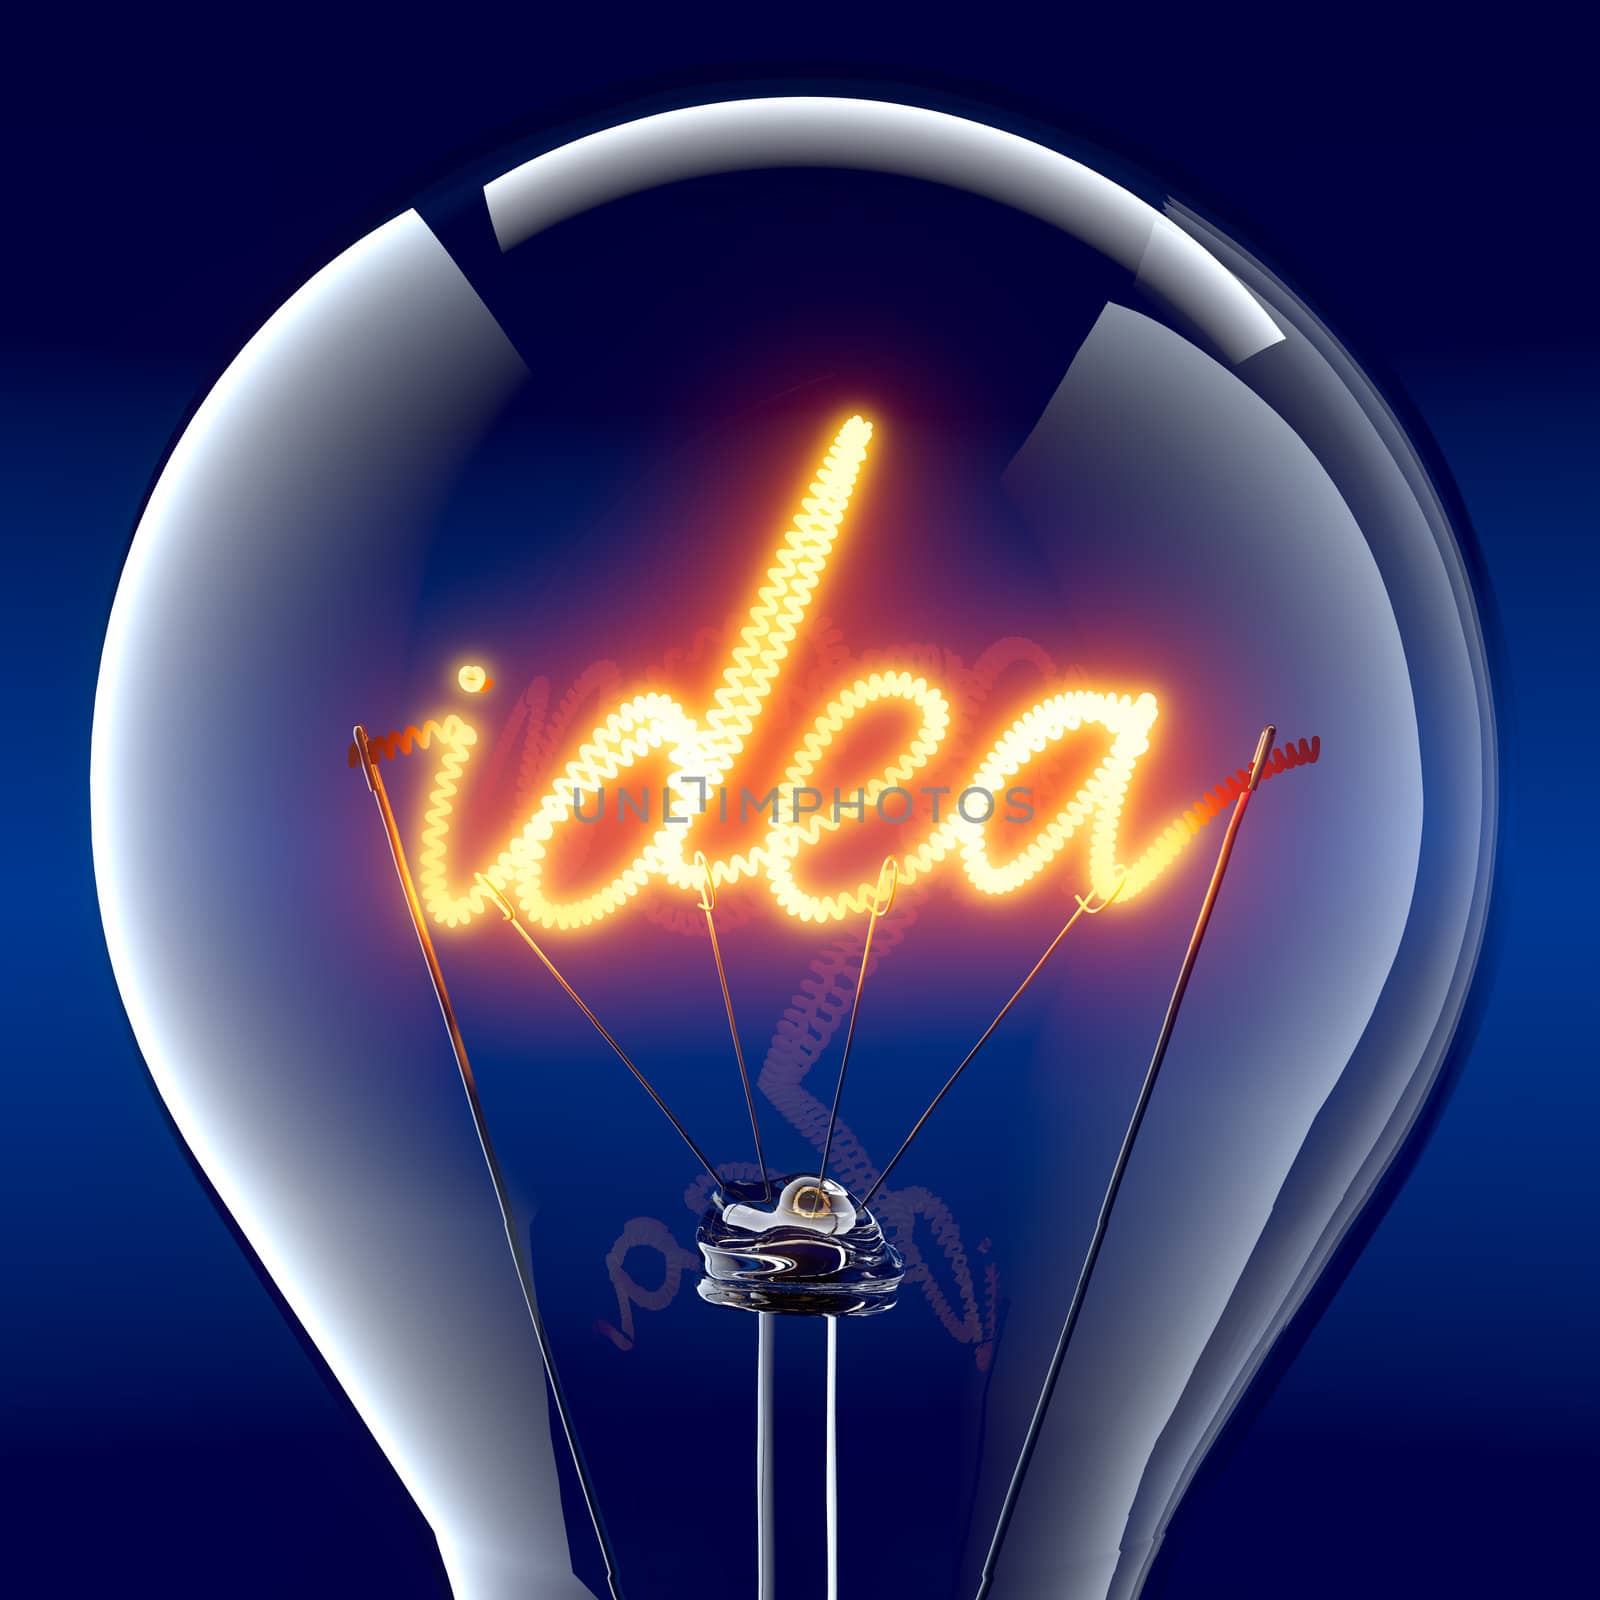 Tungsten spiral in the form of the word "idea" - a metaphor for creative energy, miraculously ignites inside a glass bulb